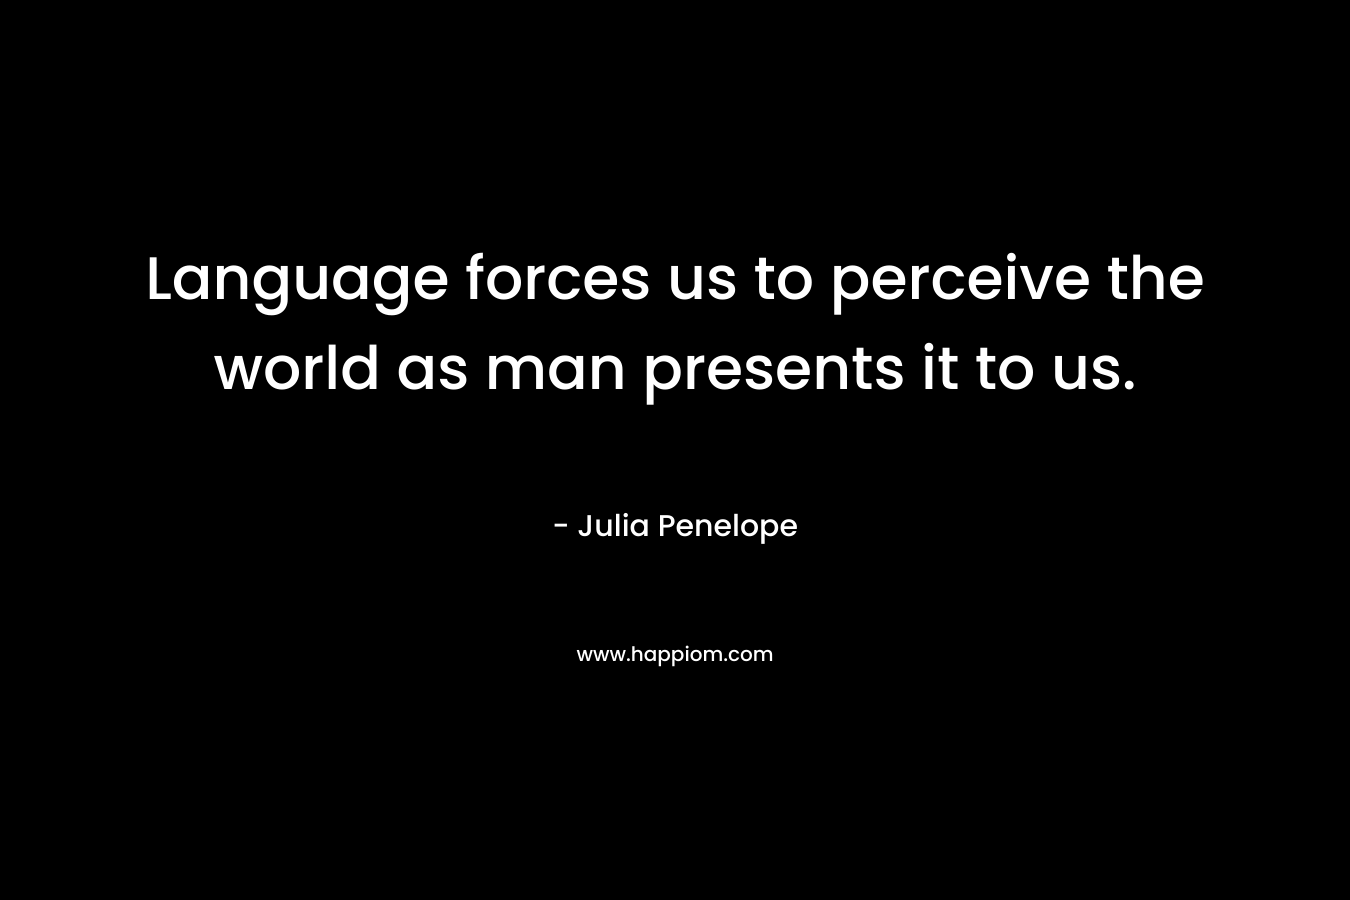 Language forces us to perceive the world as man presents it to us. – Julia Penelope